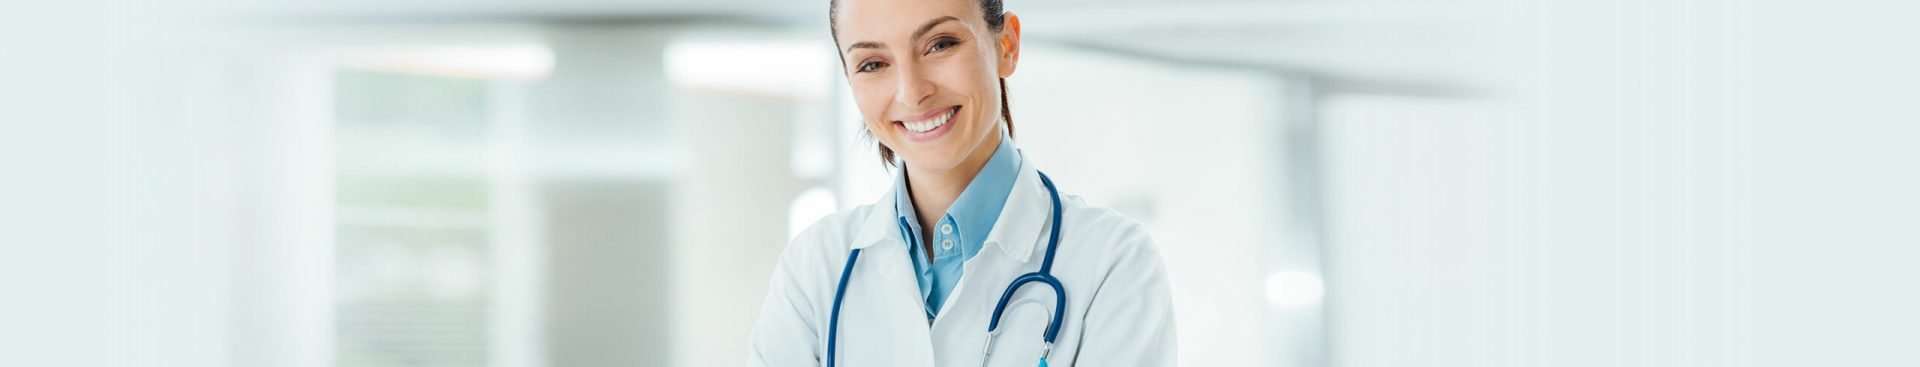 Where to Get Health Insurance When Unemployed